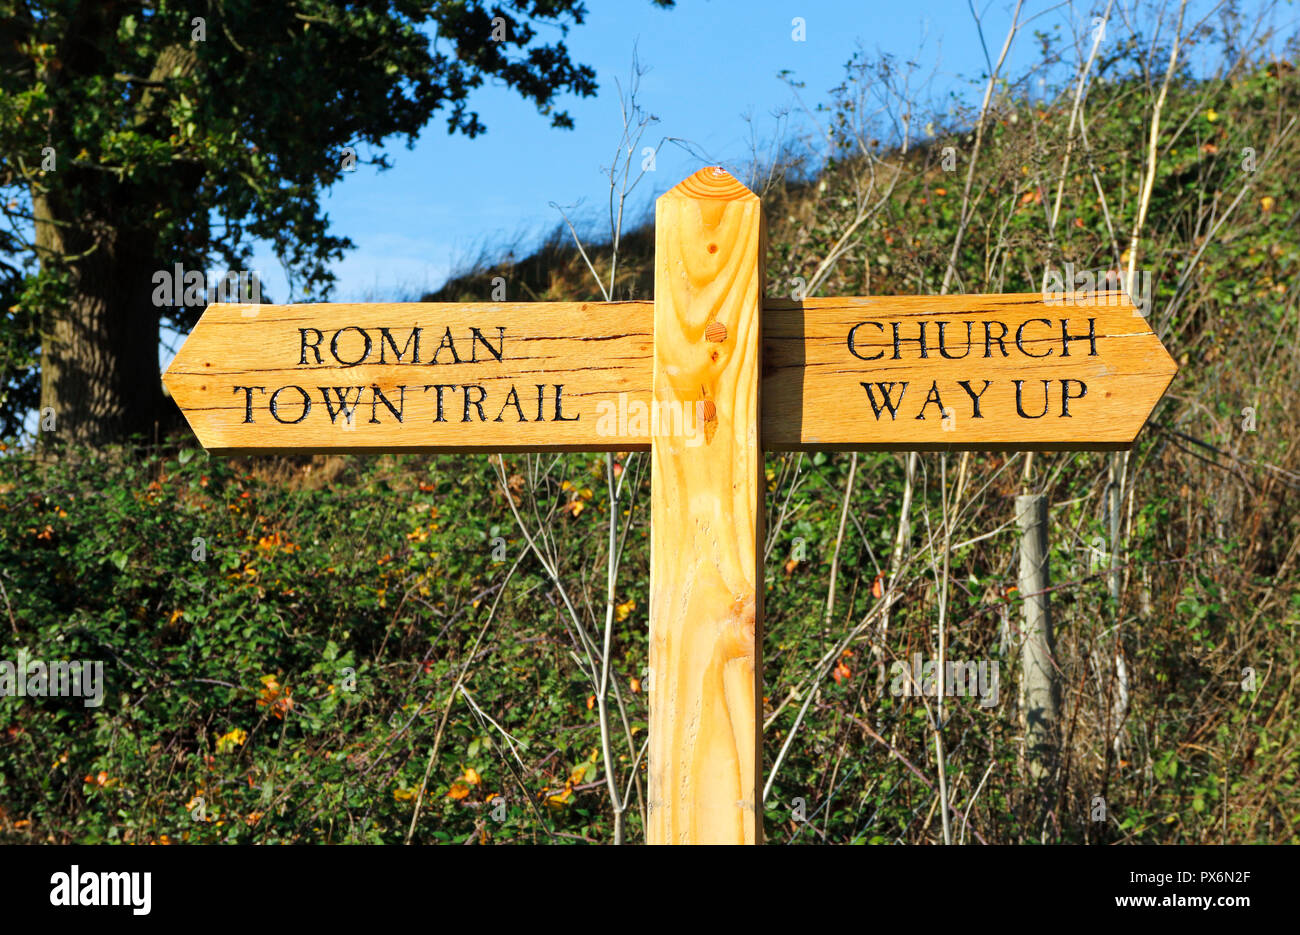 A fingerpost sign on footpath indicating way to Church and Venta Icenorum Roman Town Trail at Caistor St Edmund, Norfolk, England, UK, Europe. Stock Photo